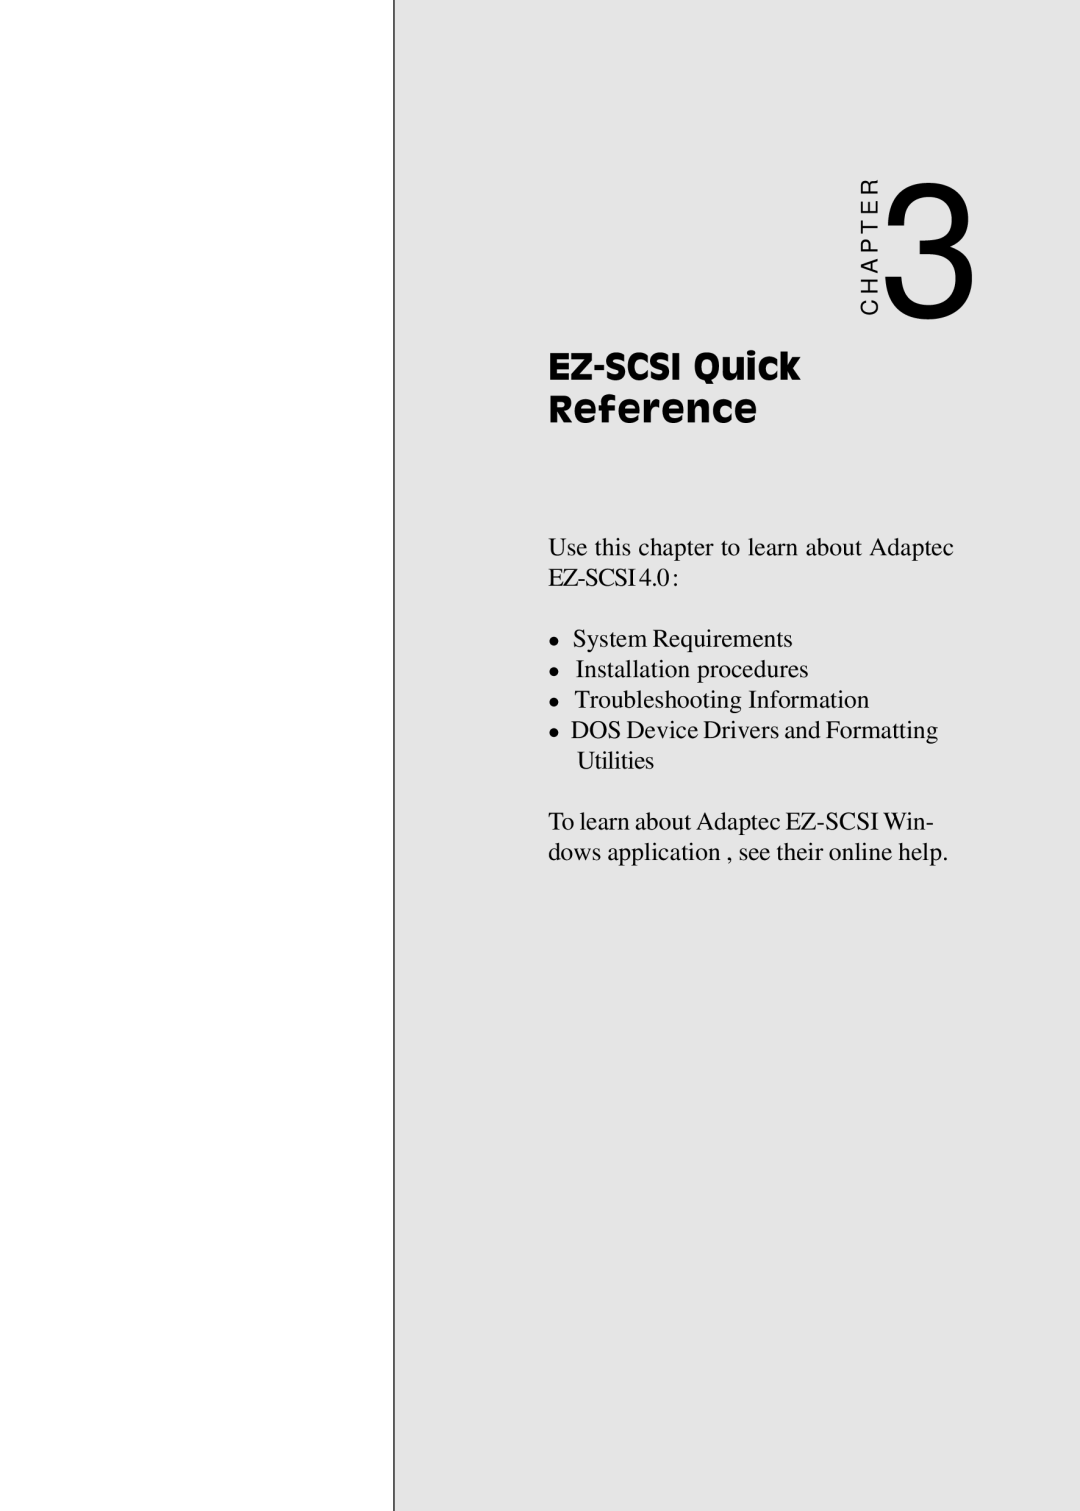 Adaptec PC/104, PCM-3420 EZ-SCSI Quick Reference, Use this chapter to learn about Adaptec EZ-SCSI l System Requirements 